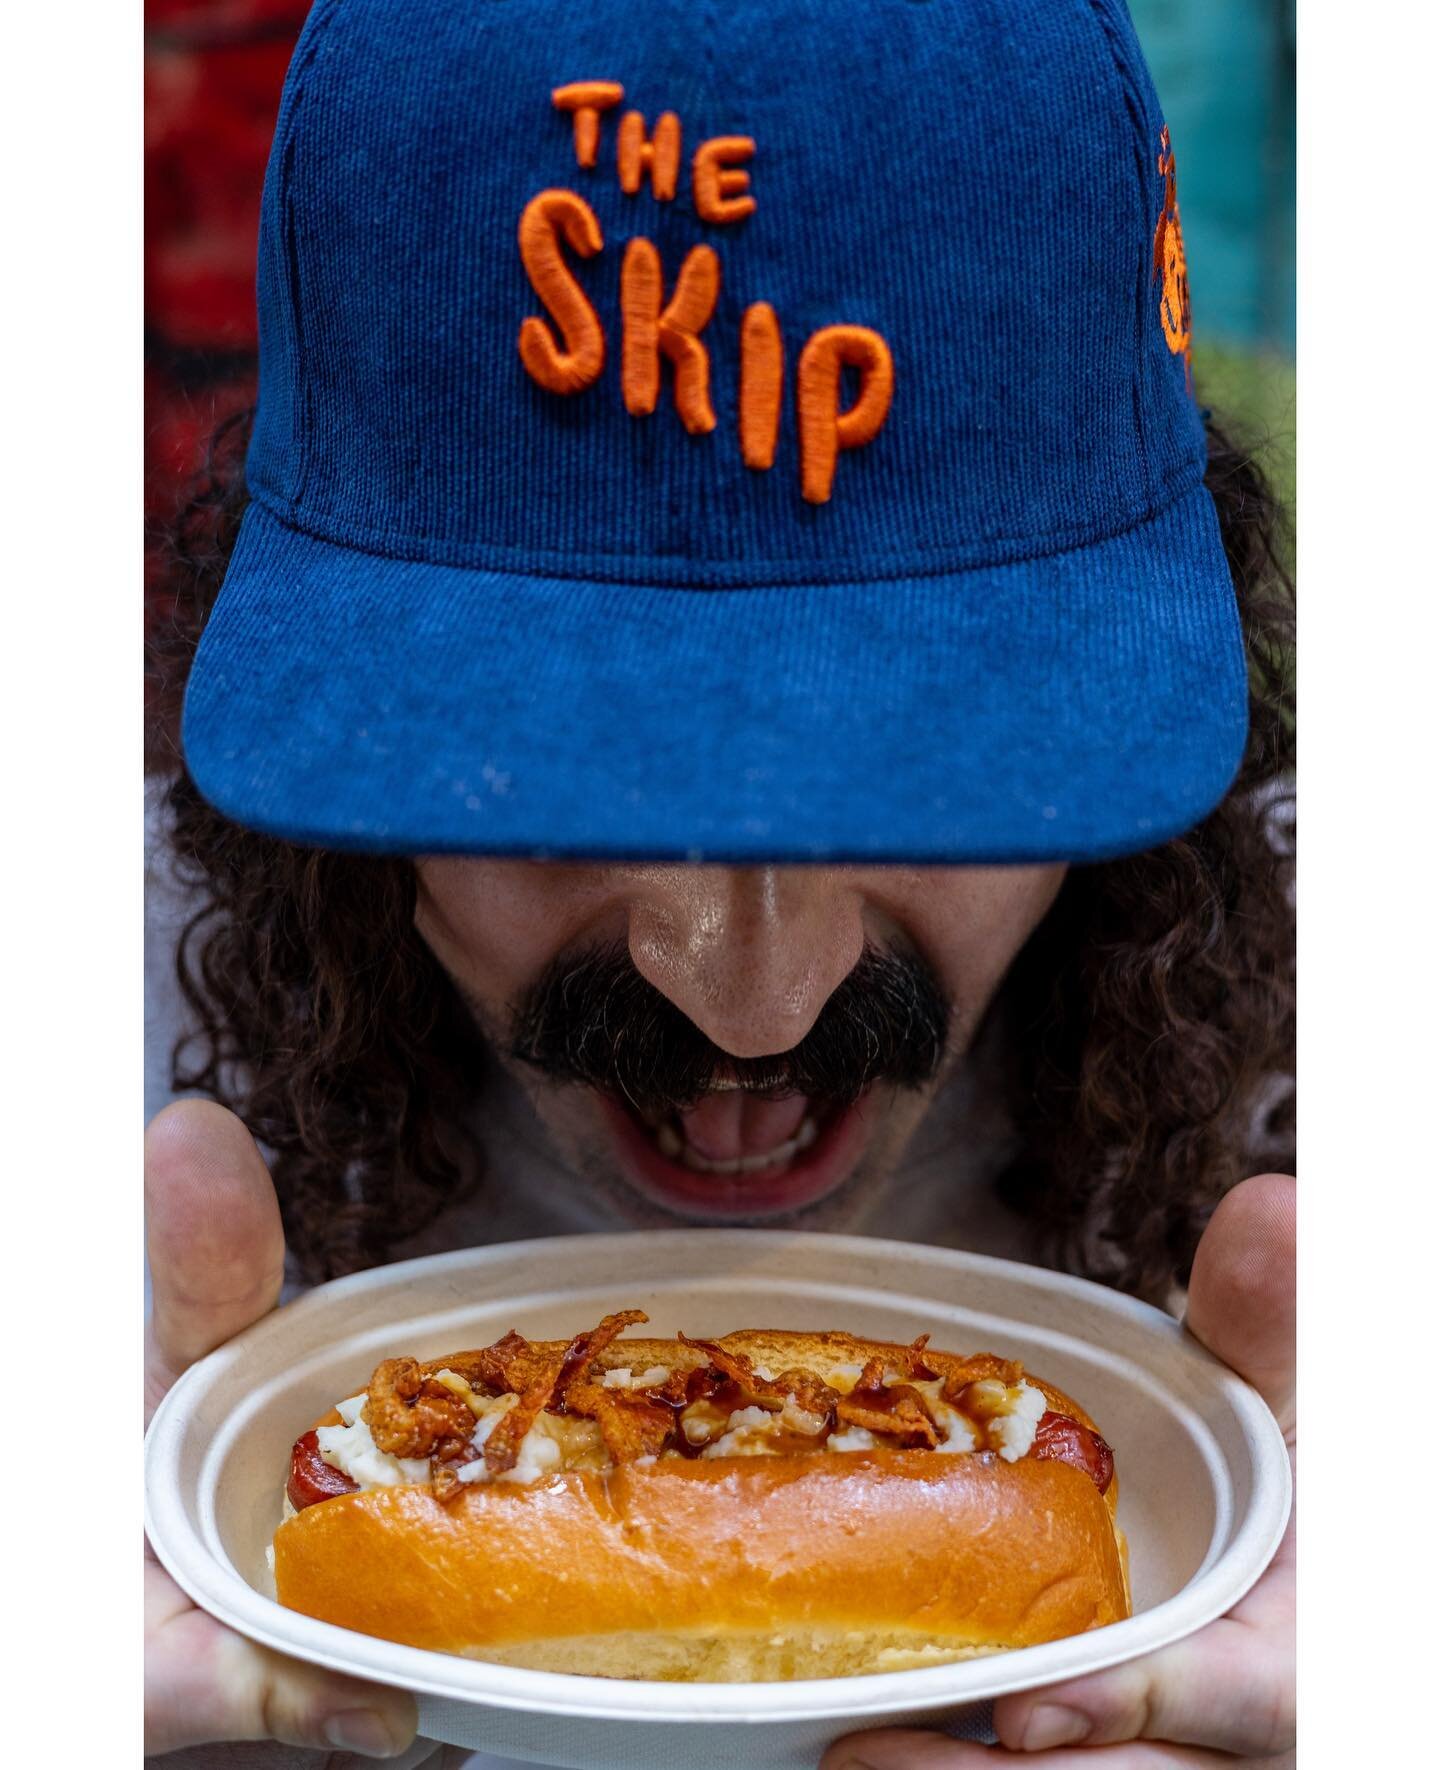 🏇DERBY DAY SPECIAL #1🏇

THE COLONEL&rsquo;S FAMOUS DOG
AN ALL BEEF DINGER WITH MASHED POTATOES, GRAVY, AND CRISPY CHICKEN SKINS TOSSED IN AT LEAST 11 HERBS AND SPICES

TONIGHT ONLY AT @theskipdetroit DERBY DAY PARTY